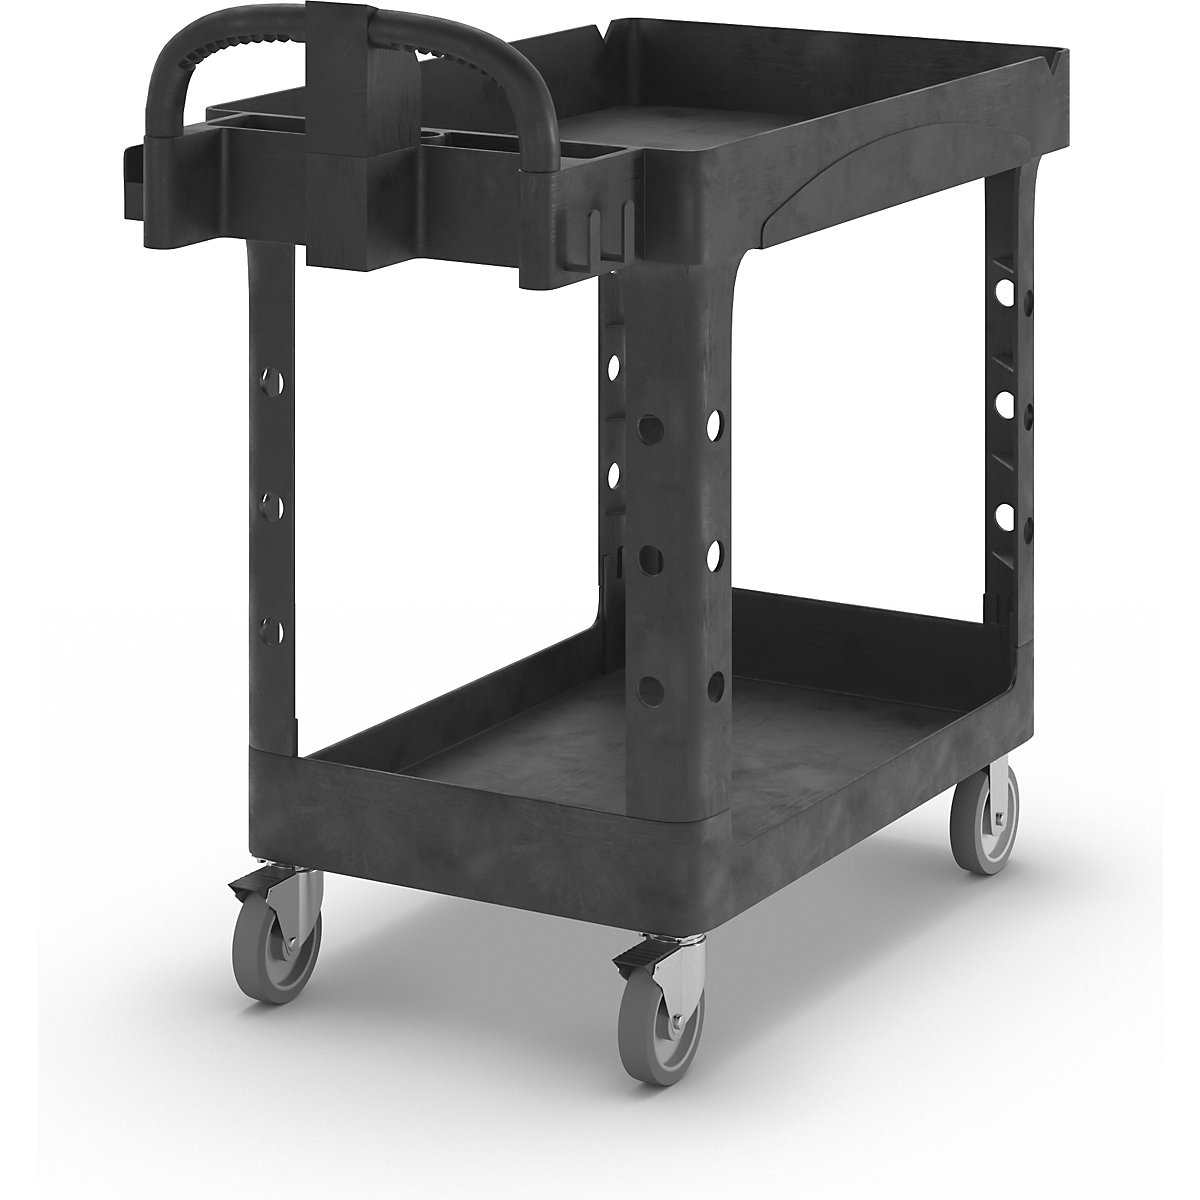 General purpose table trolley made of plastic – Rubbermaid